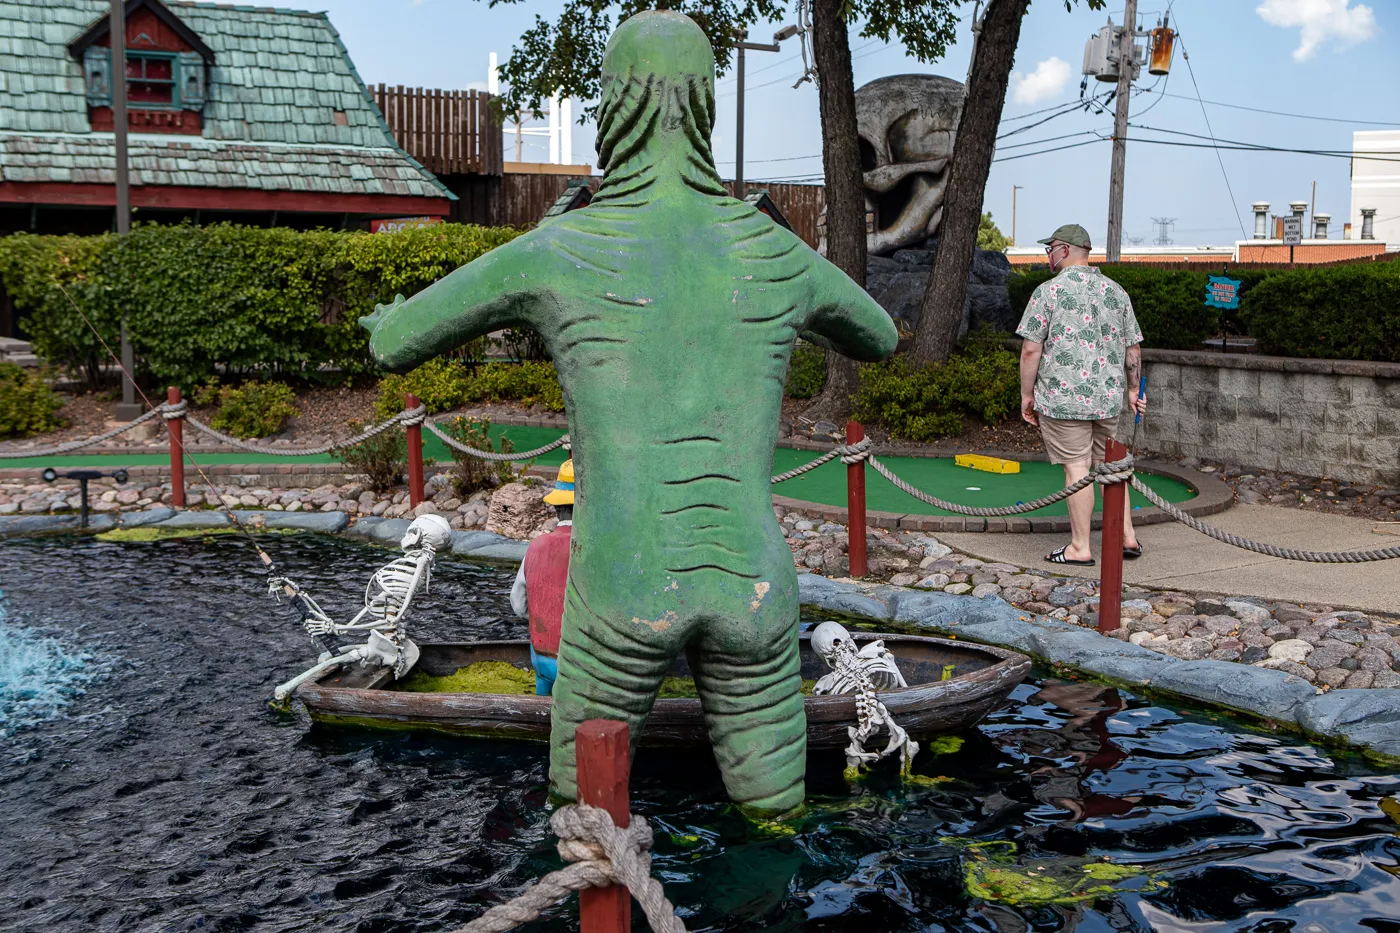 Creature from the black lagoon at Haunted Trails mini golf in Burbank, Illinois